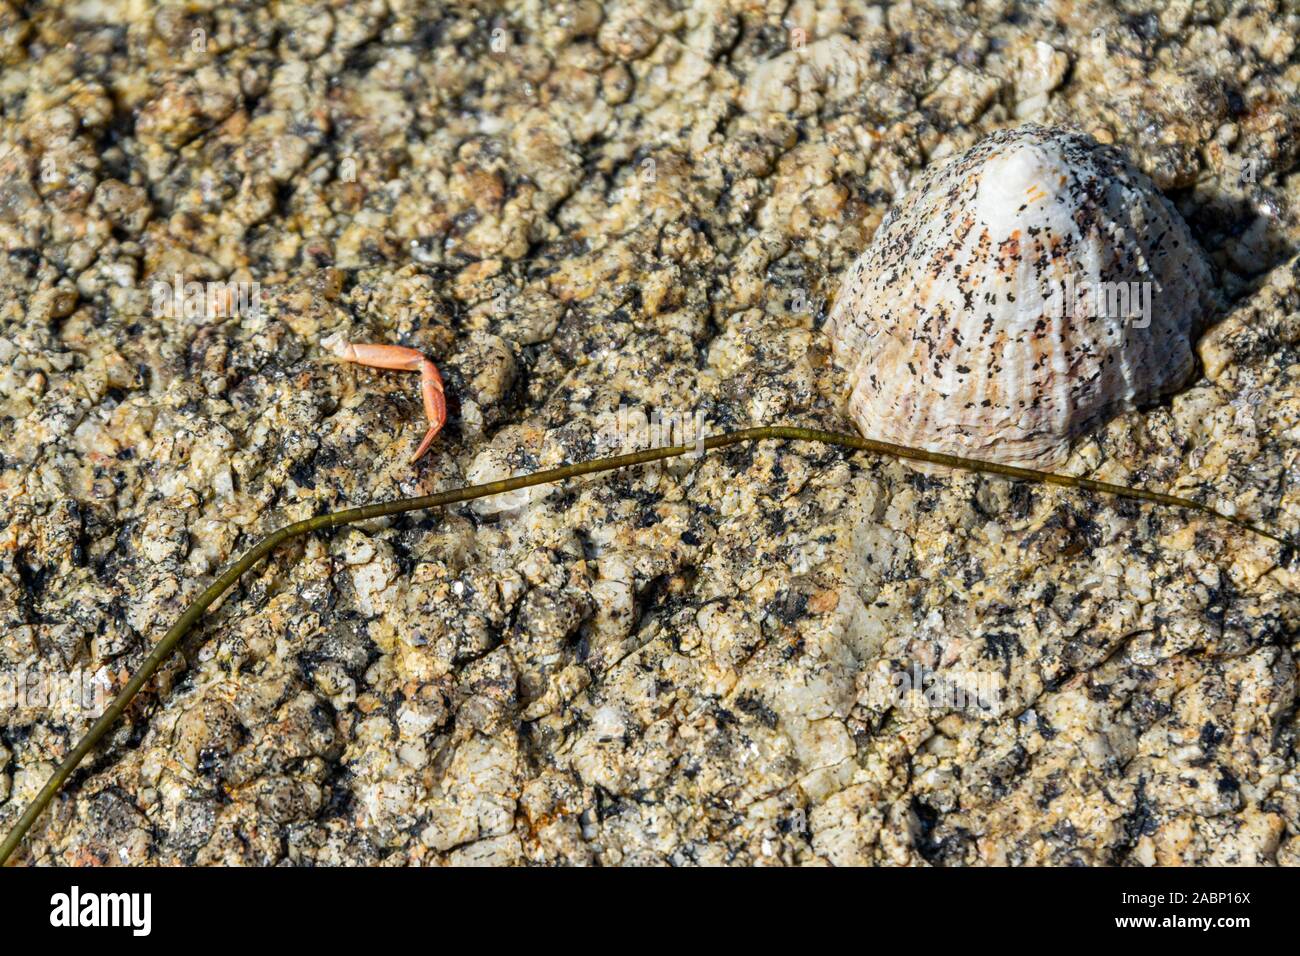 A common limpet, crap leg and seaweed on a rock Stock Photo